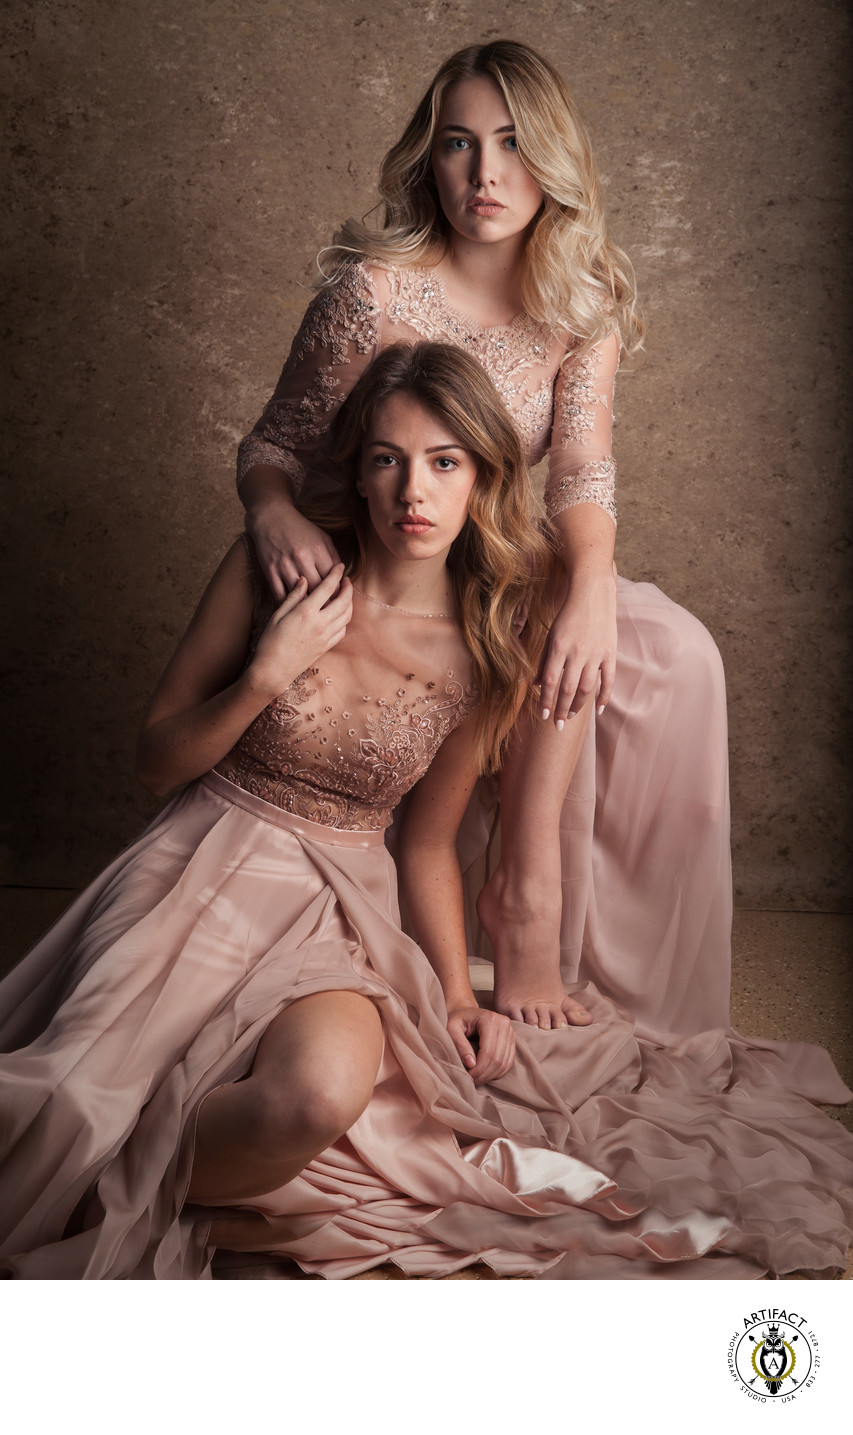 Award-Winning Portrait | Melodie and Danielle